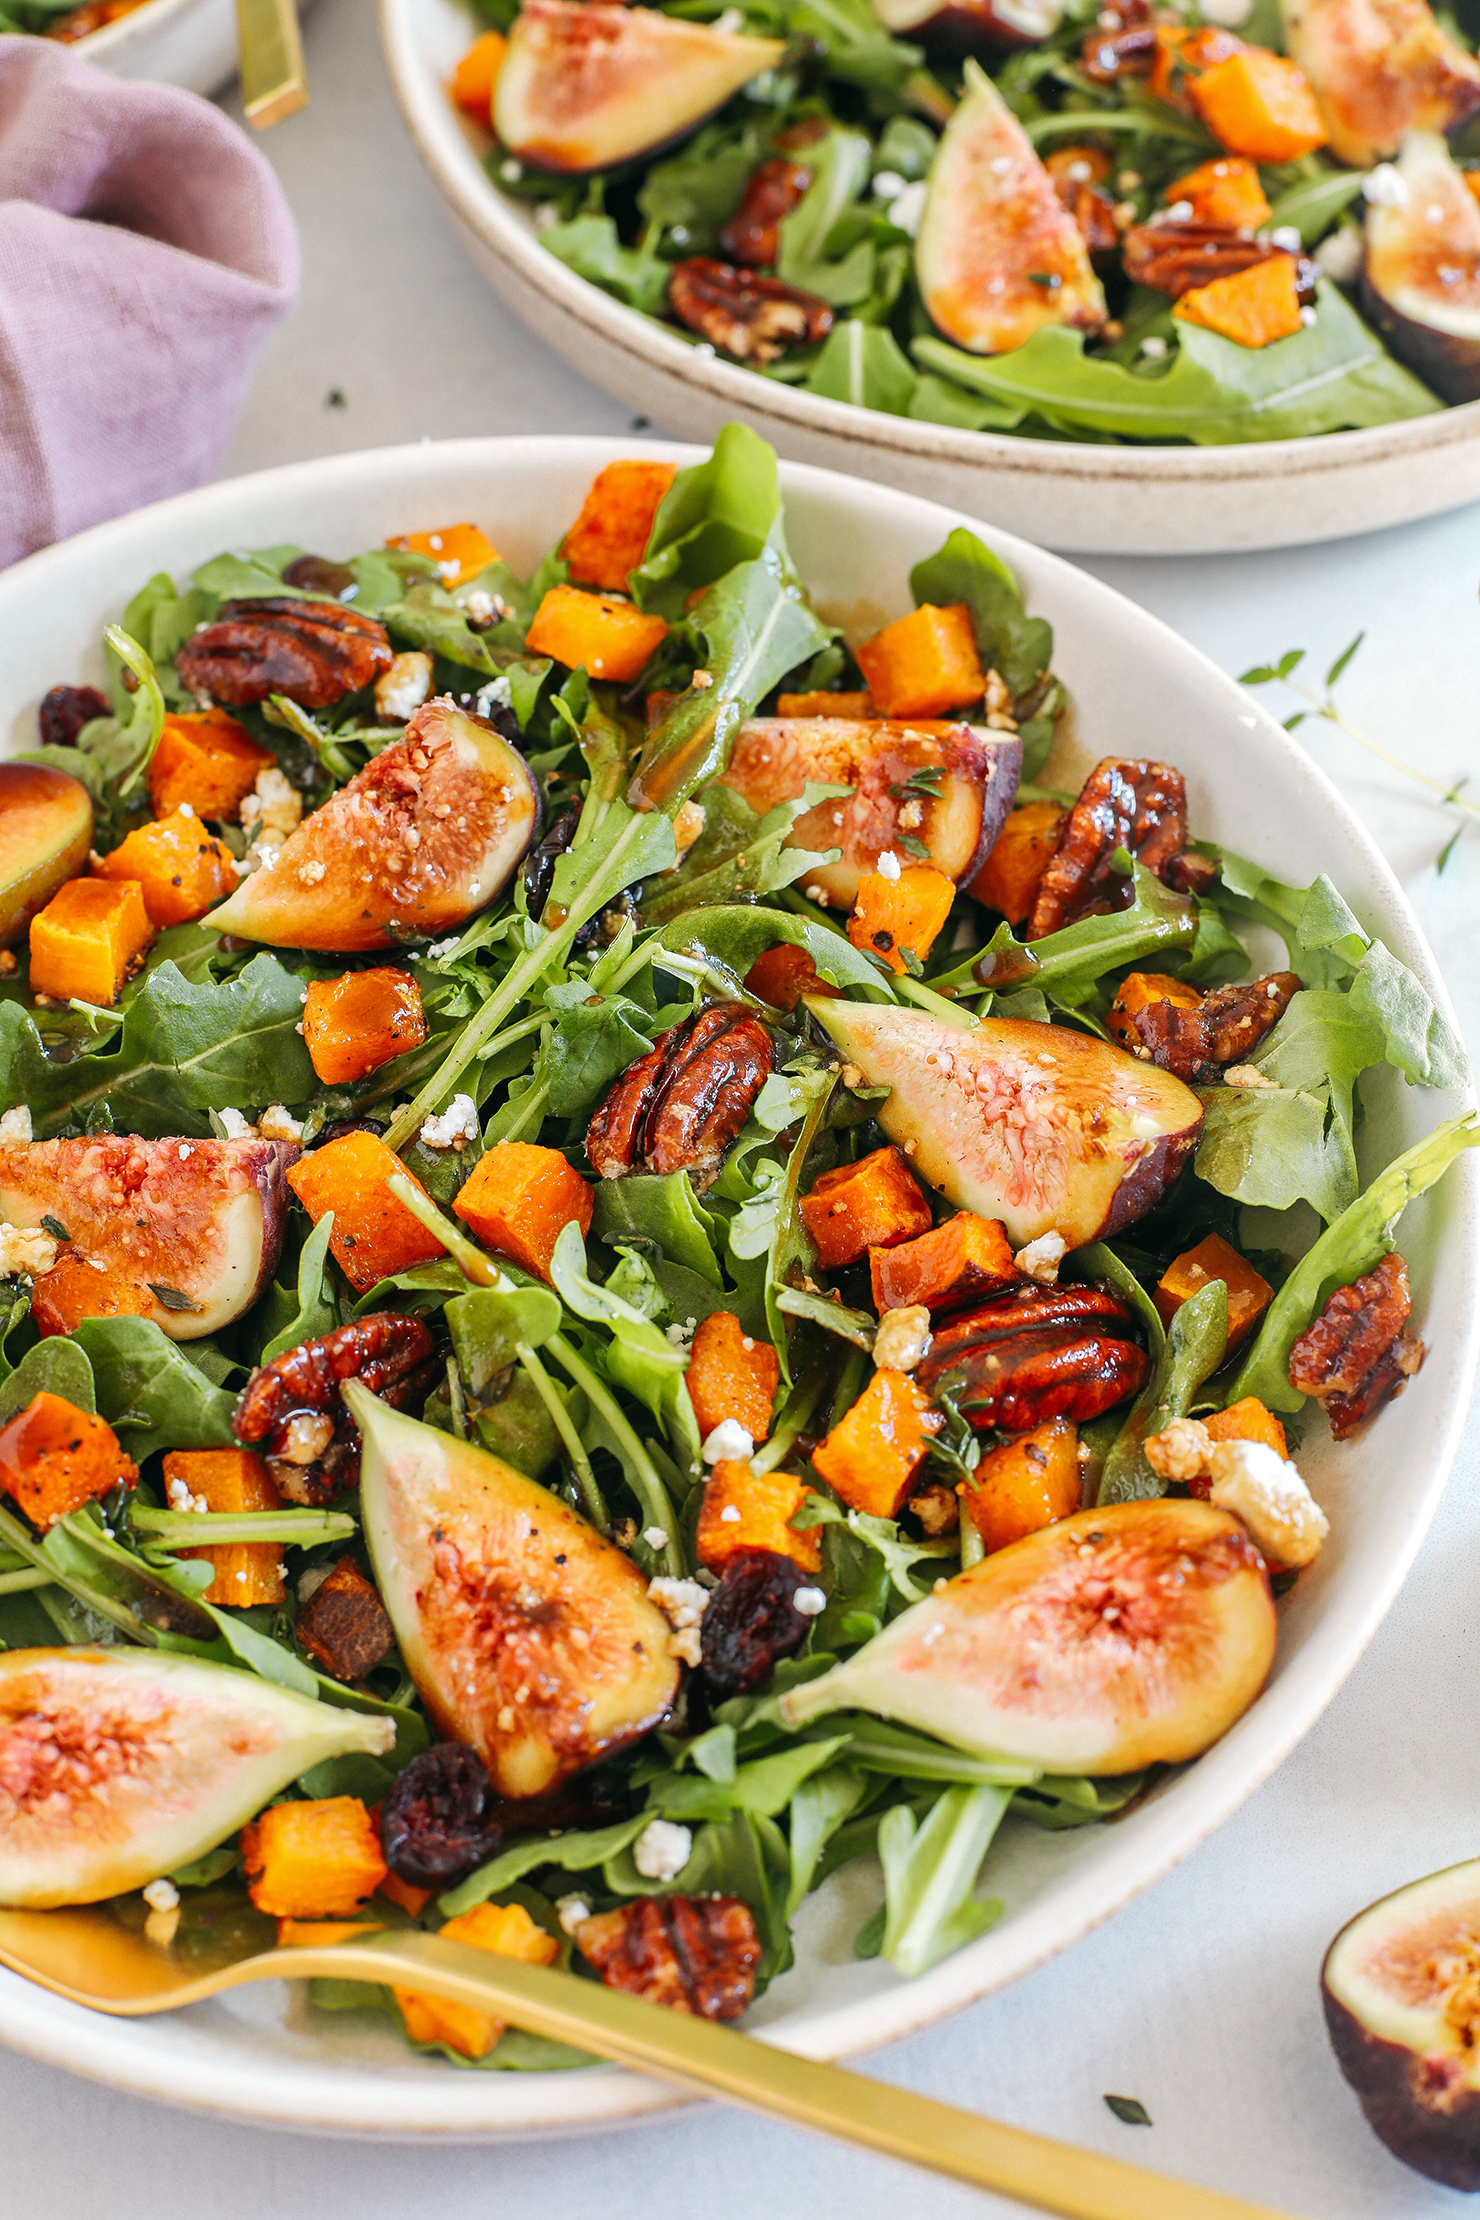 This Fig Salad with Roasted Butternut Squash is the perfect fall salad loaded with leafy greens, fresh figs, candied pecans, and creamy goat cheese all tossed with a rich balsamic dressing!